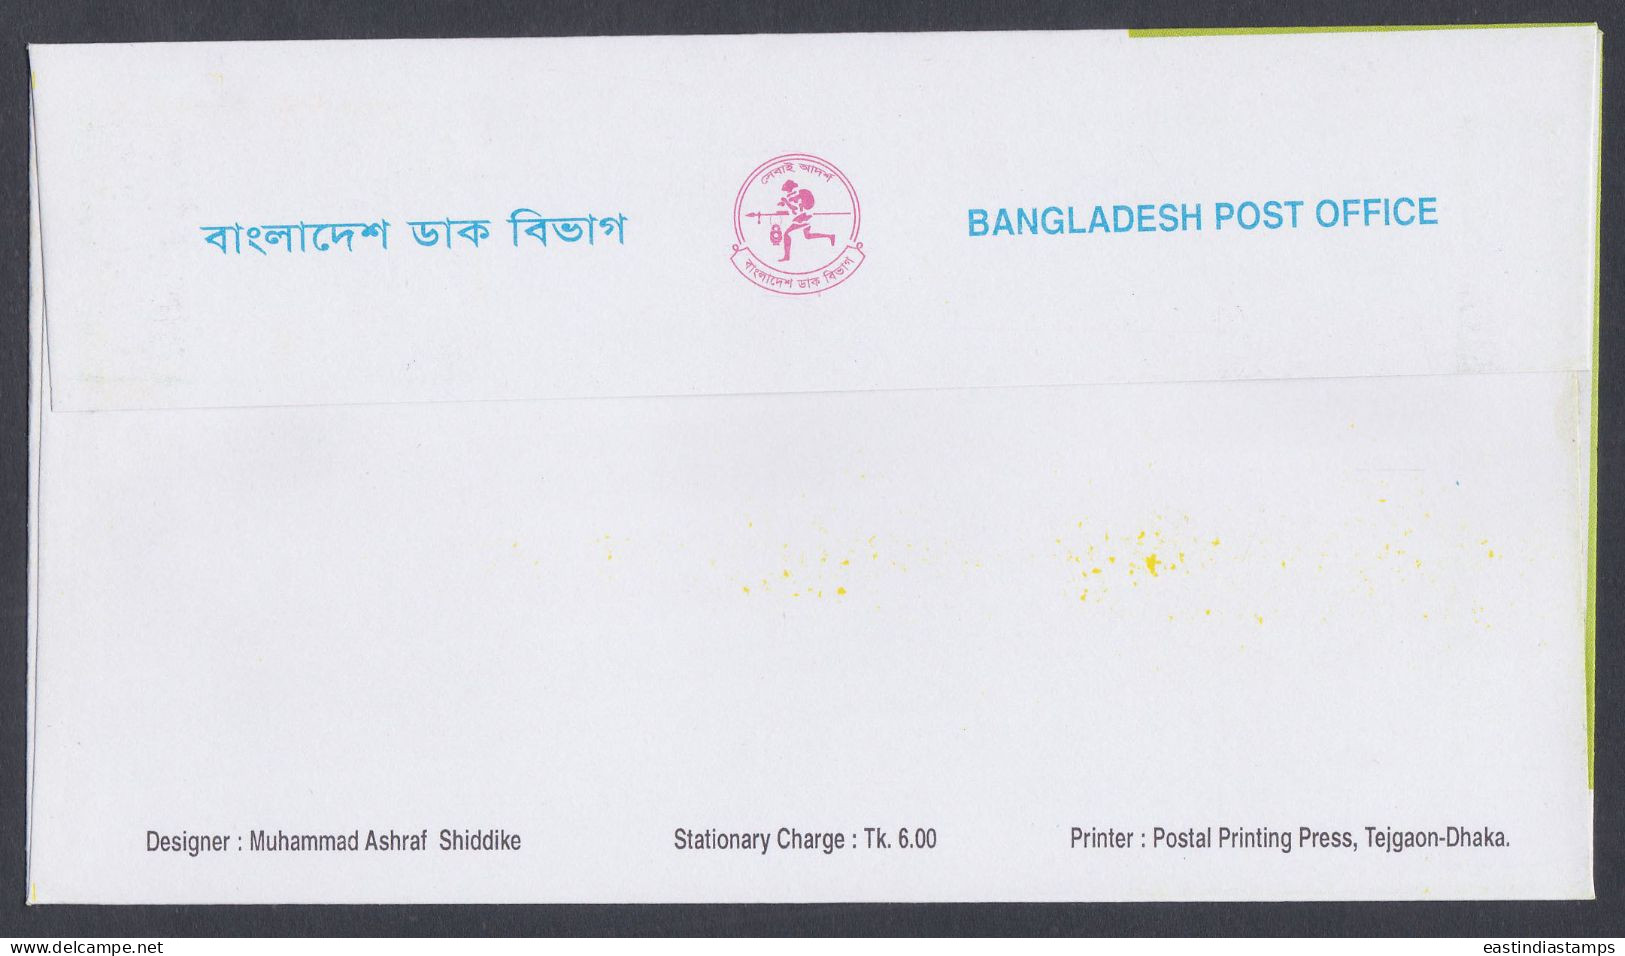 Bangladesh 2010 FDC Jamboree, Scout, Scouting, Scouts, Children, Child, First Day Cover - Bangladesch